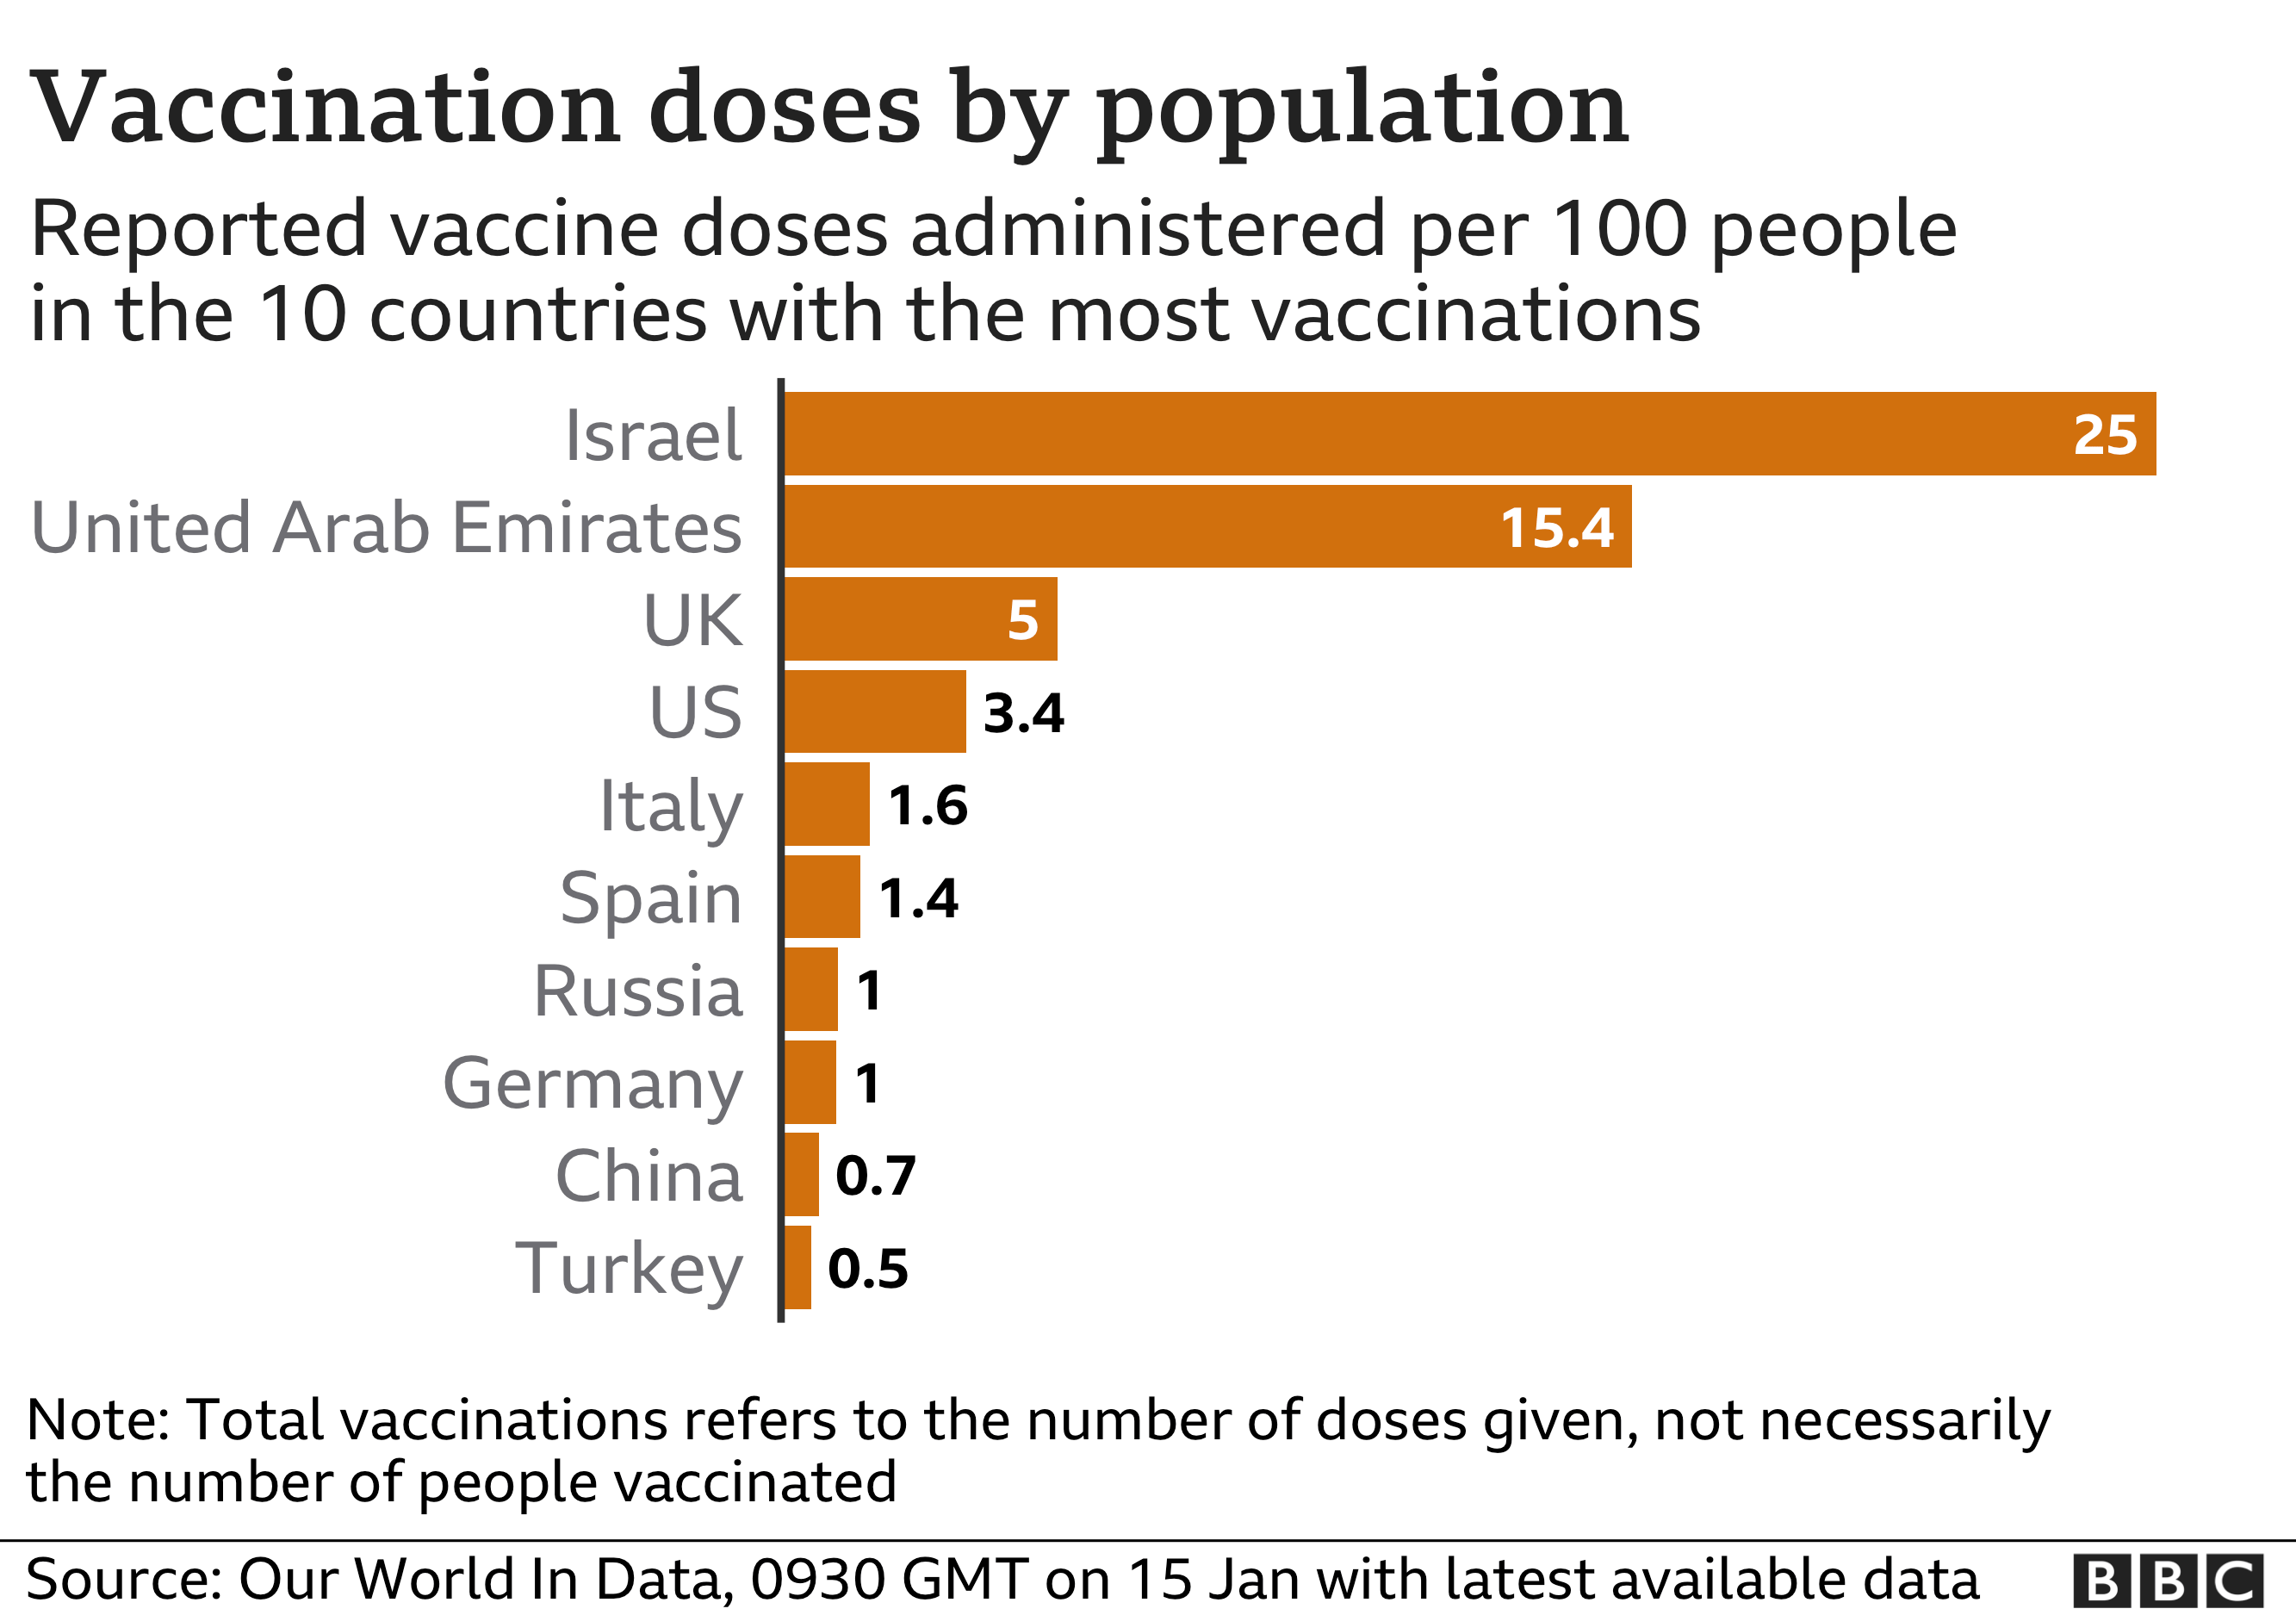 https://ichef.bbci.co.uk/news/976/cpsprodpb/BC36/production/_116528184_vaccine_doses_per100_countries_most_vax15jan-nc.png